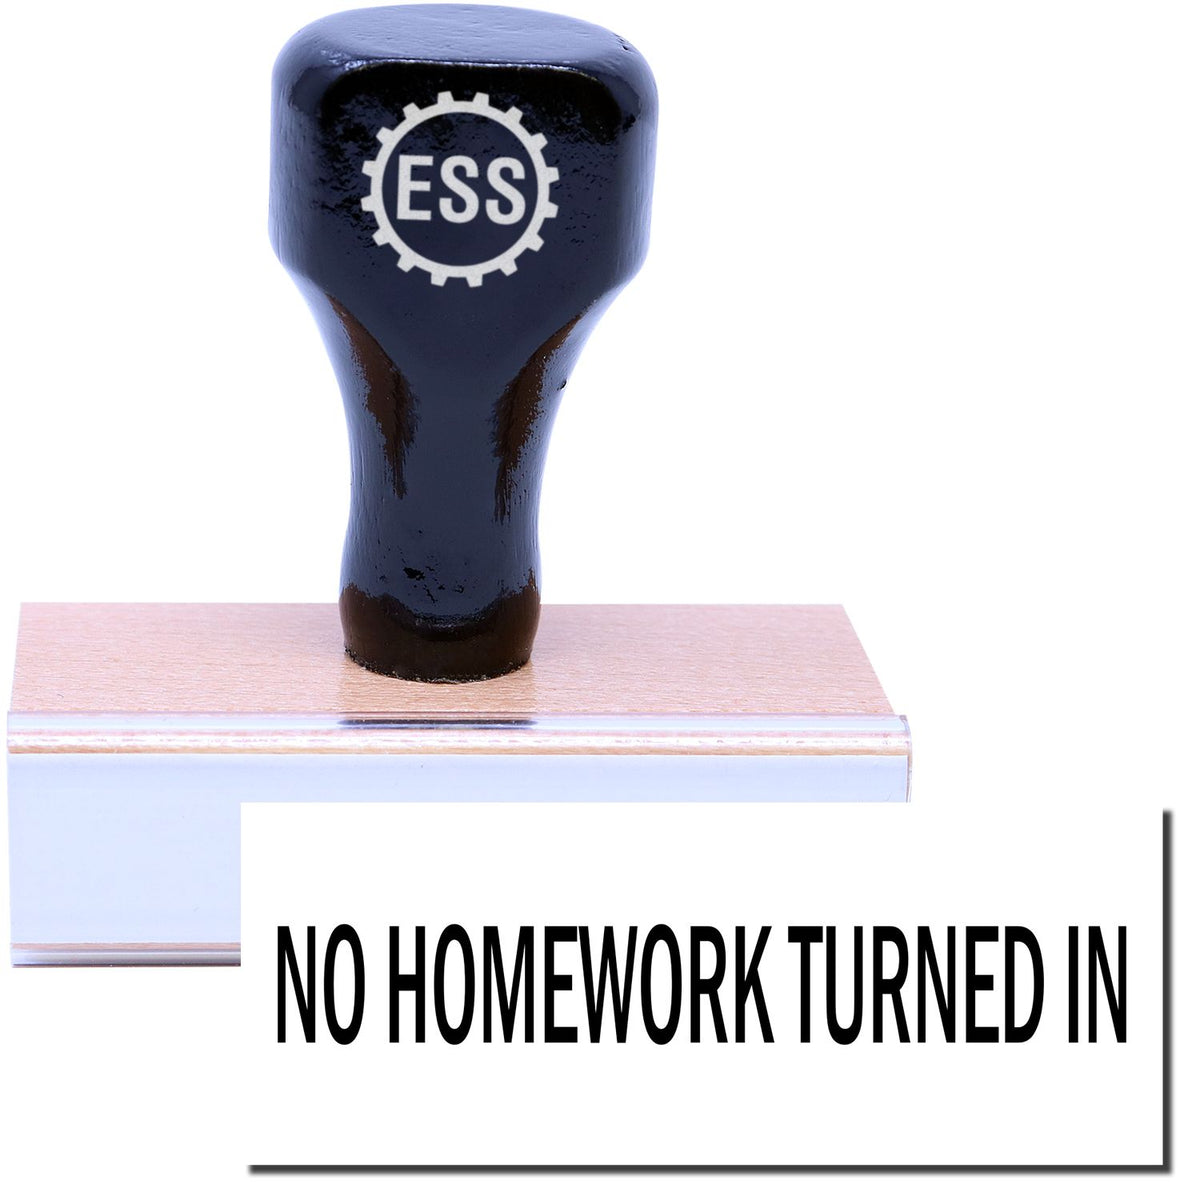 A stock office rubber stamp with a stamped image showing how the text &quot;NO HOMEWORK TURNED IN&quot; in a large font is displayed after stamping.